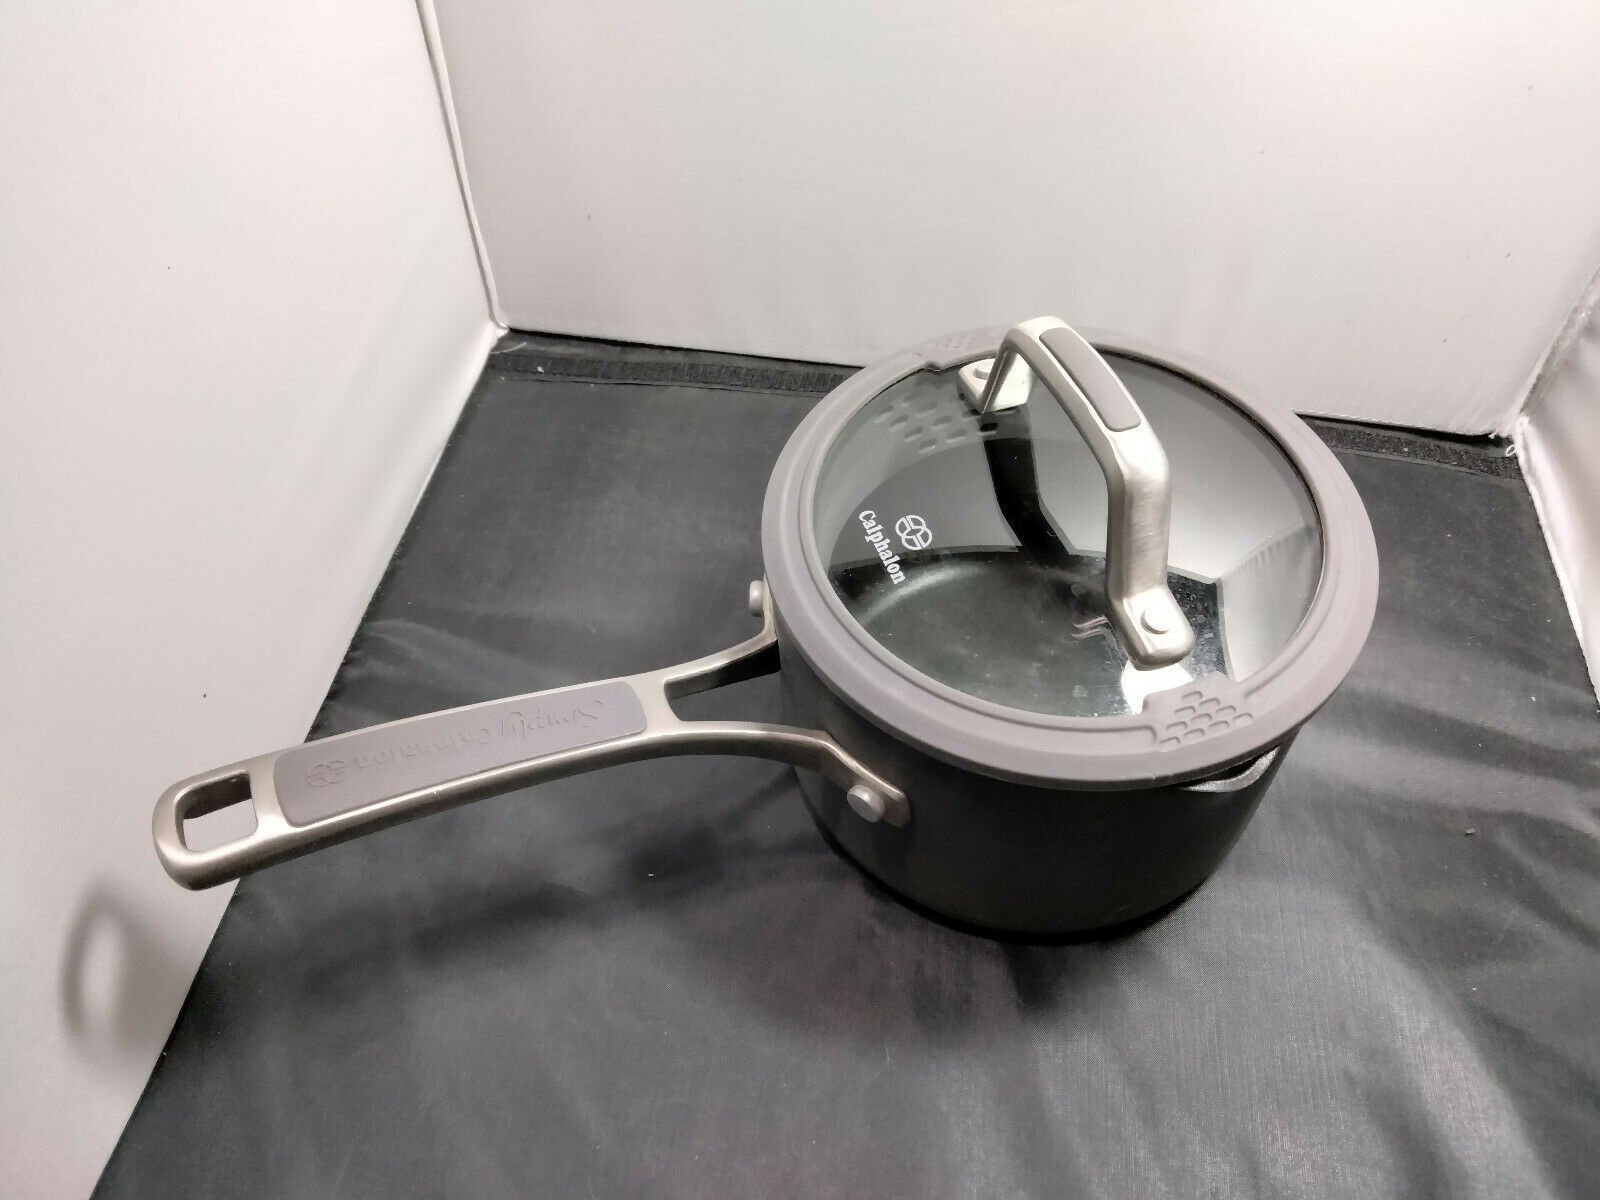 Hoffritz Platinum Pots, 4 Qt Stainless Steel Sauce Pan With Lid or